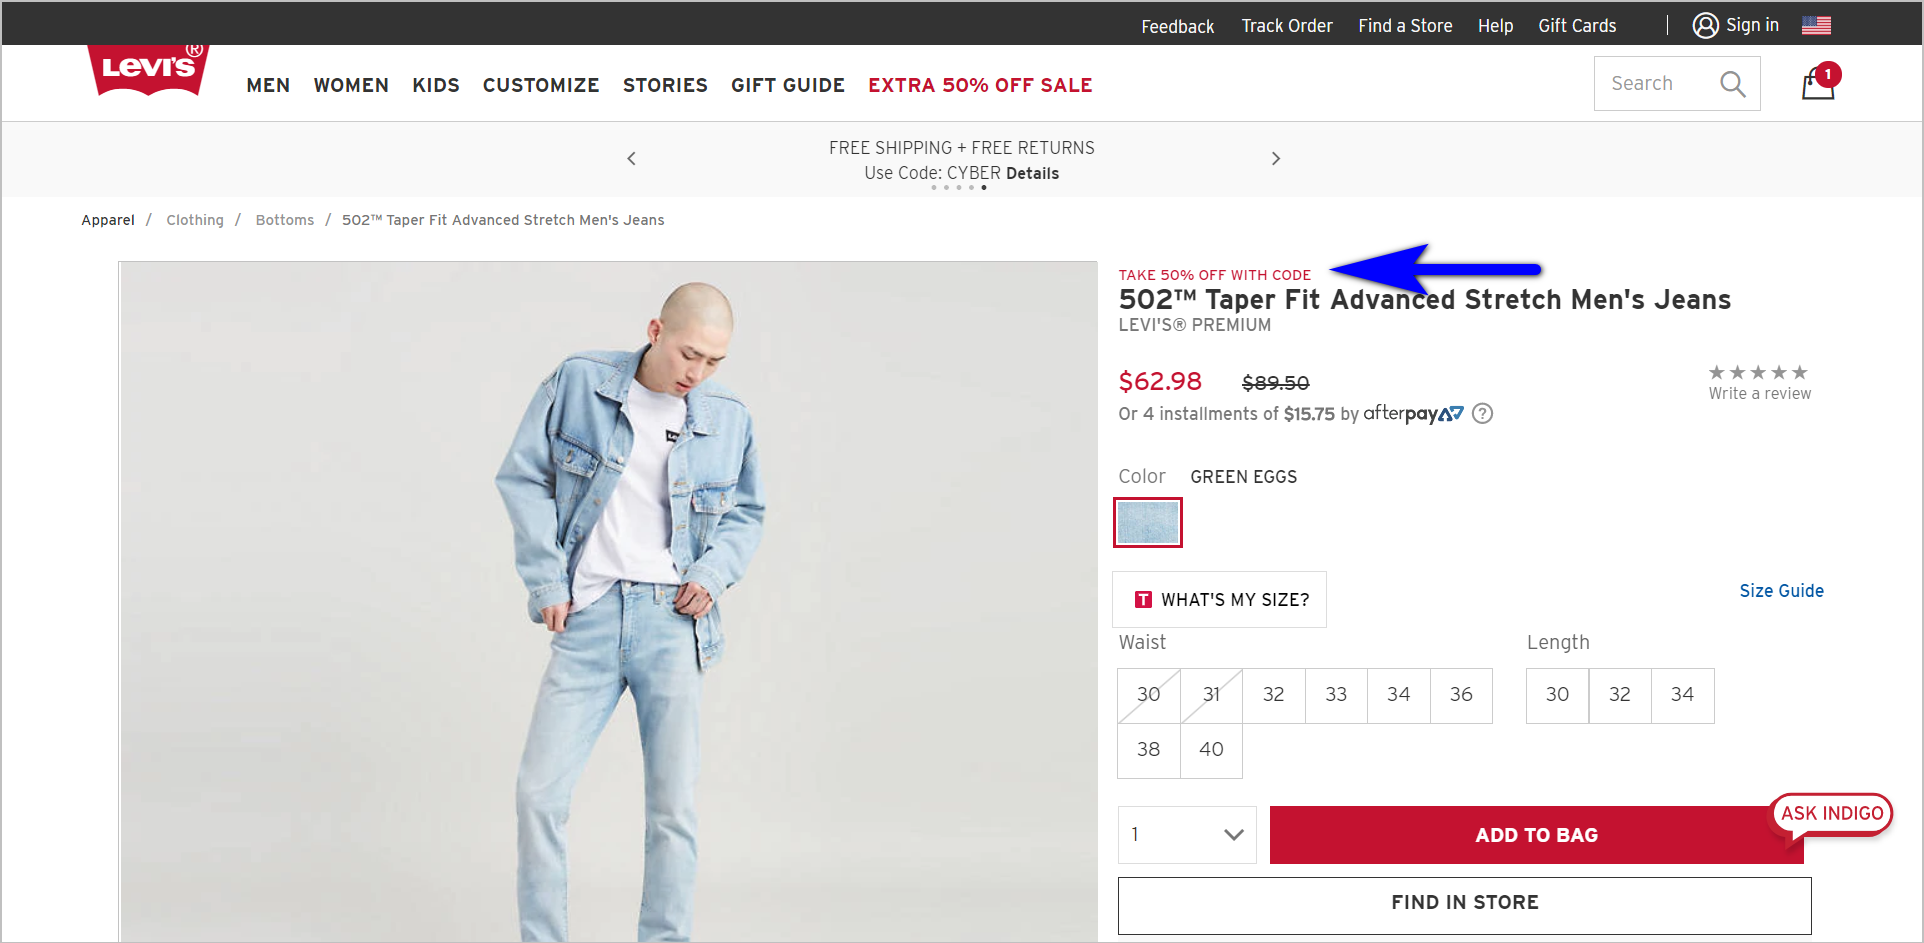 discount pricing strategies - discount on top of another discount example - levi.com pdp with a strikethrough on the original price and the sale price in red. on top of the product name, it says "take 50% off with code". global navigation also states "extra 50% off sale" in red